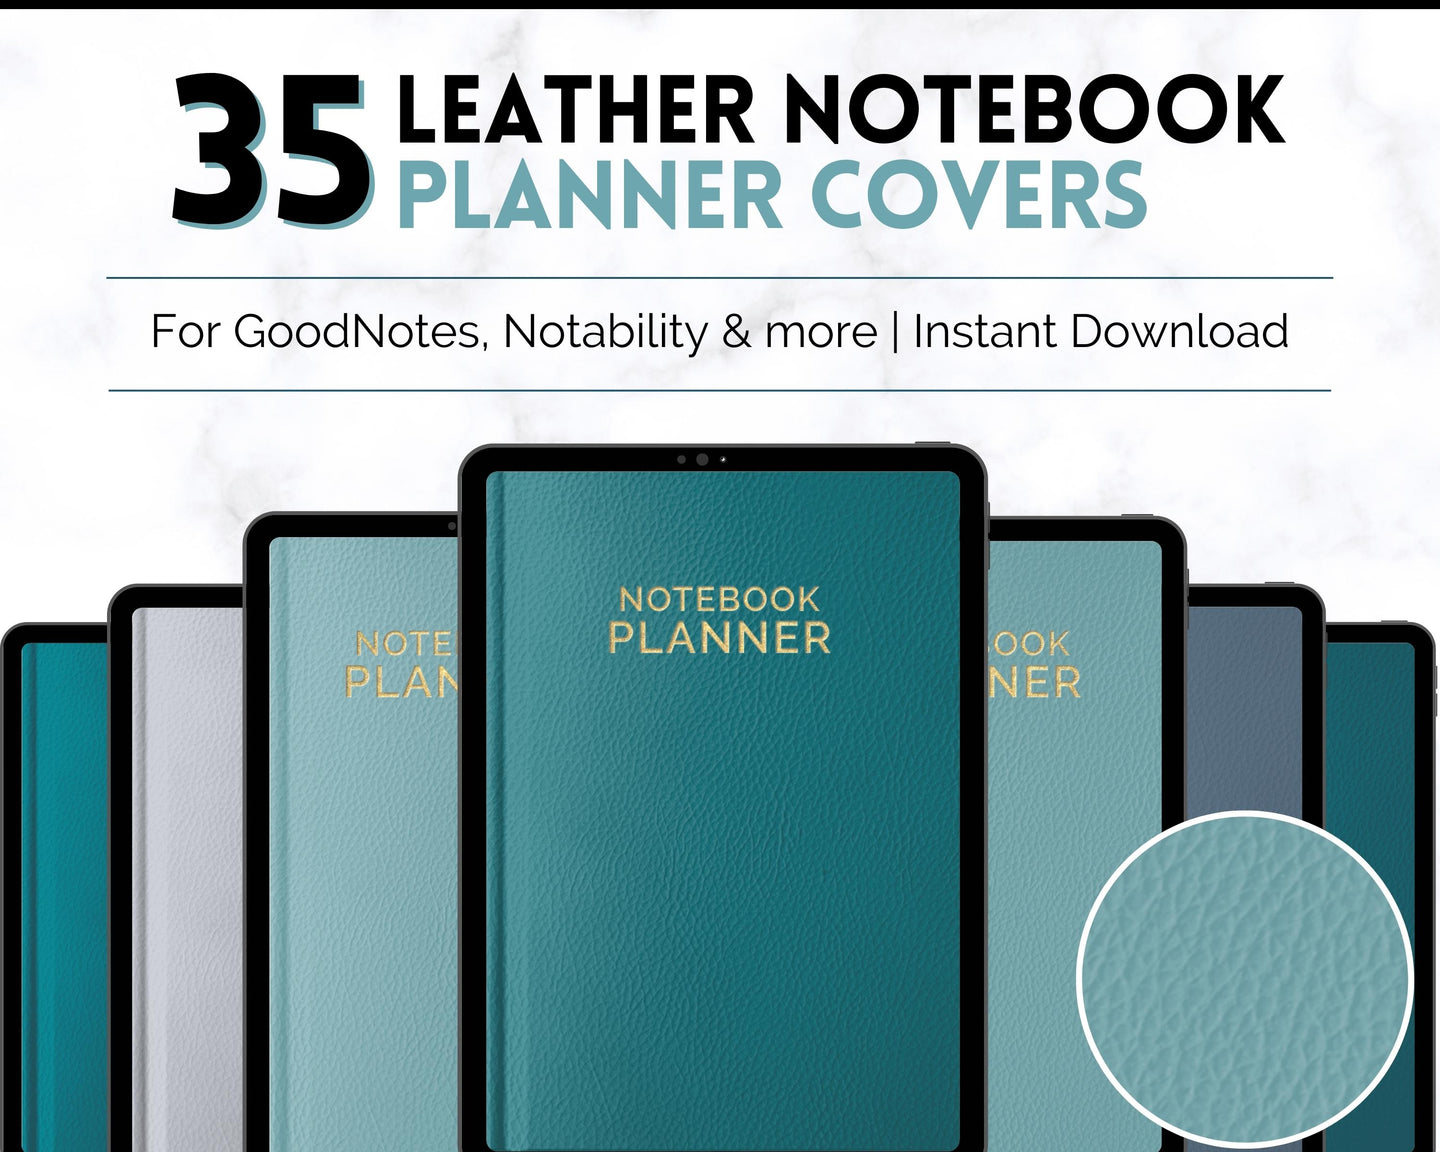 35 Digital Planner Notebook Covers | Digital Journal Covers for GoodNotes & iPad | Leather Texture Blue